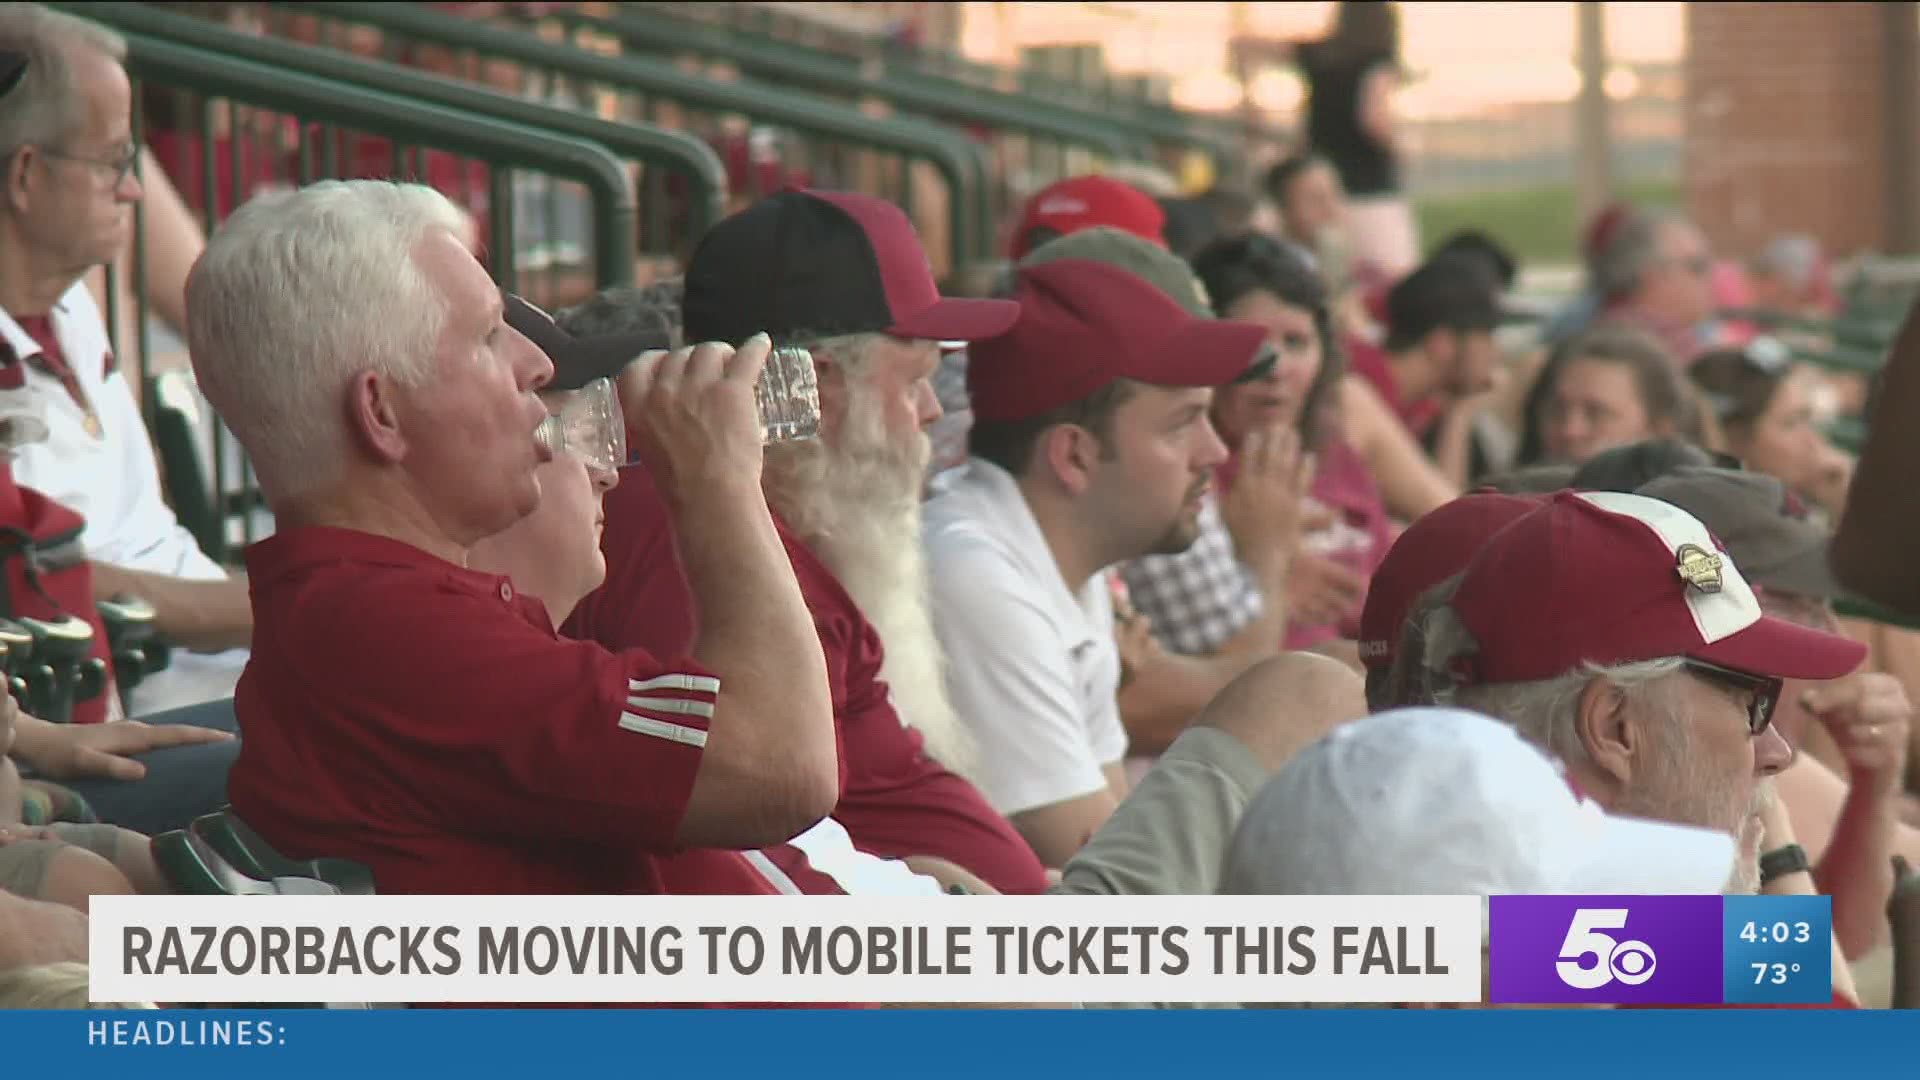 Razorbacks moving to mobile tickets this fall